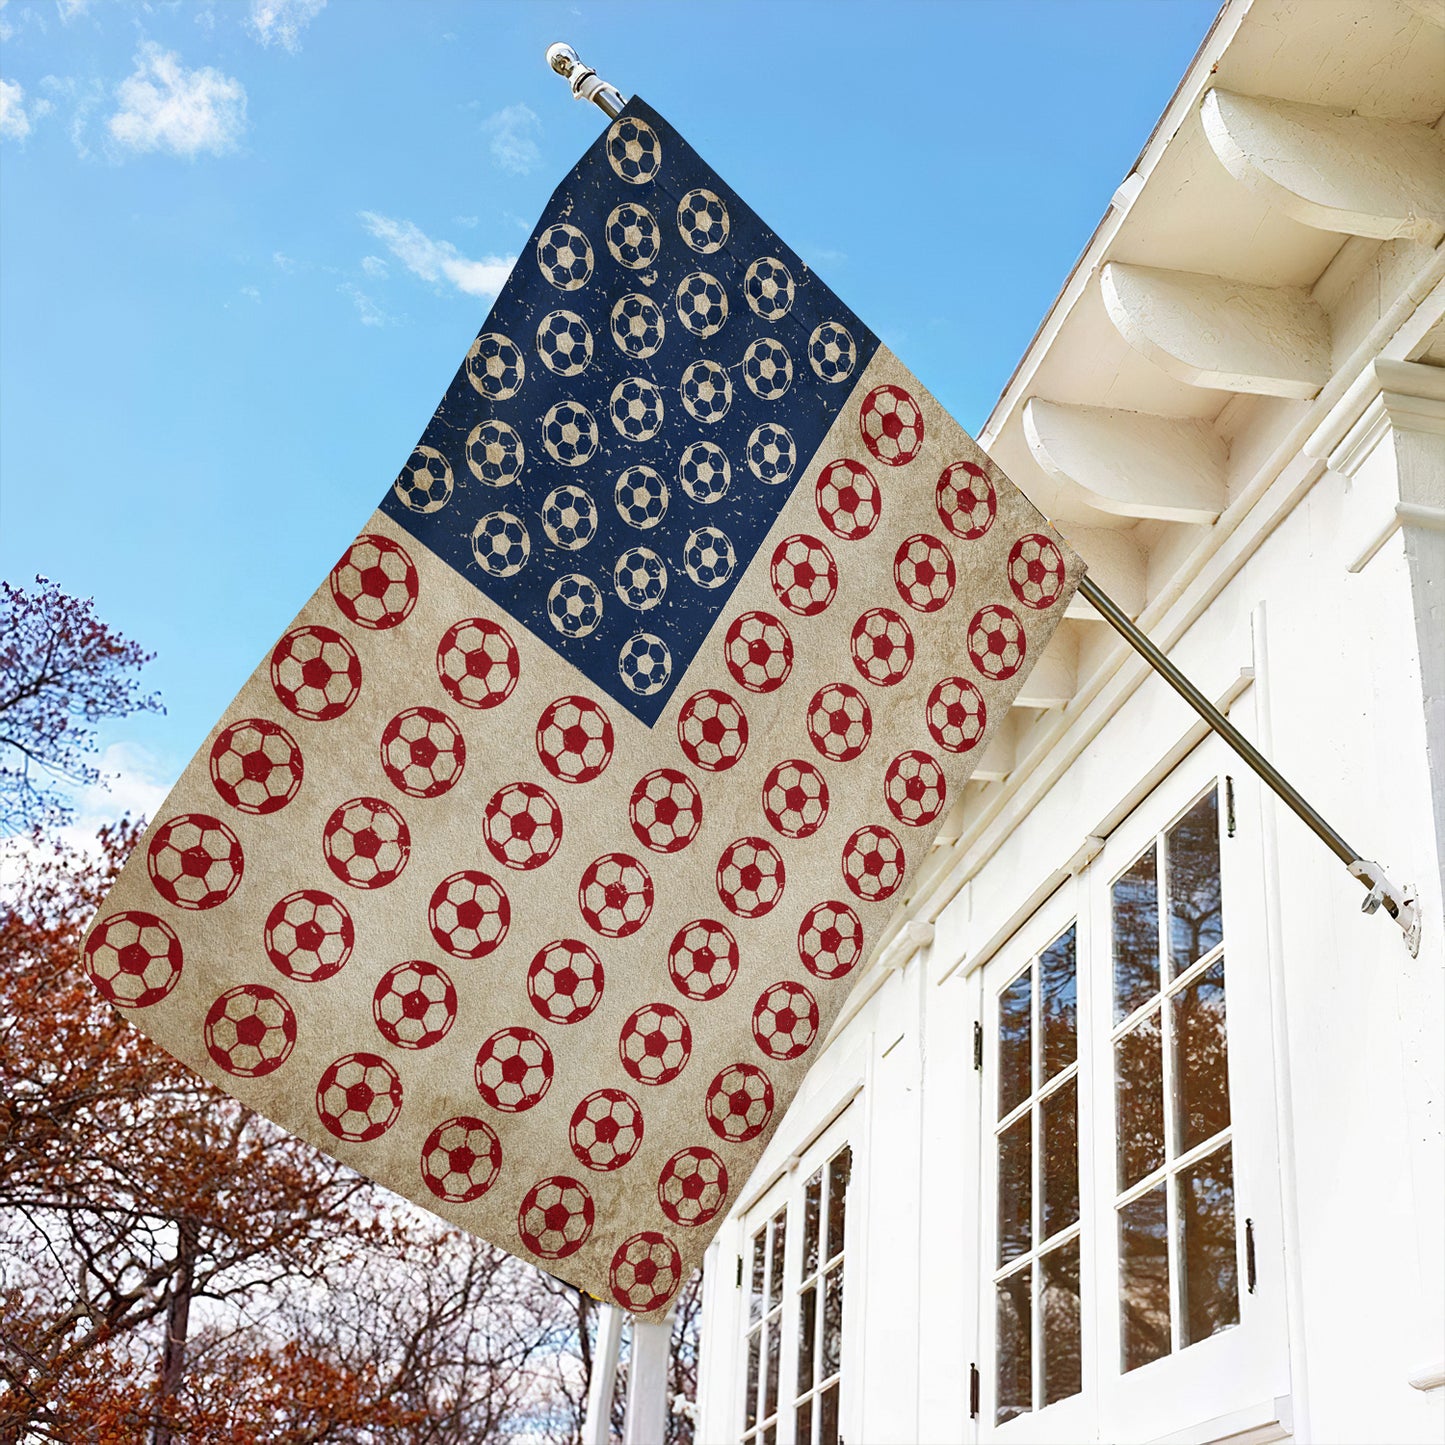 July 4th Soccer Garden Flag House Flag, Independence Day Yard Flag Gift For Soccer Lovers, Soccer Players